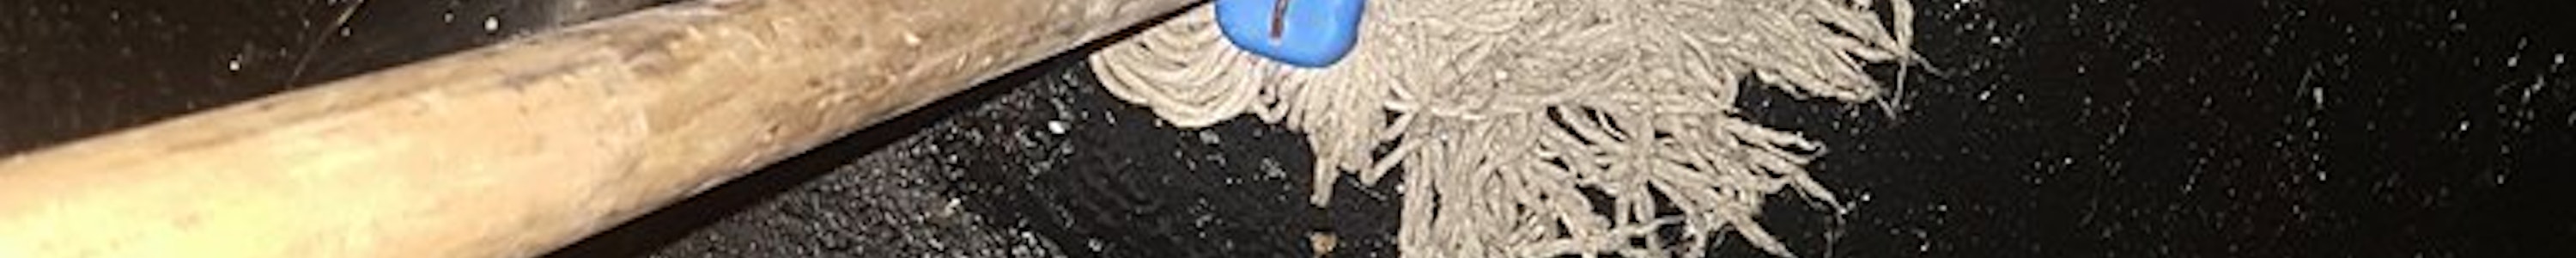 A hairy mop is being pushed against a shiny black concrete floor in a sex on site club. The image is taken looking down at the mop and the artists feet probably mid way through mopping the floor.